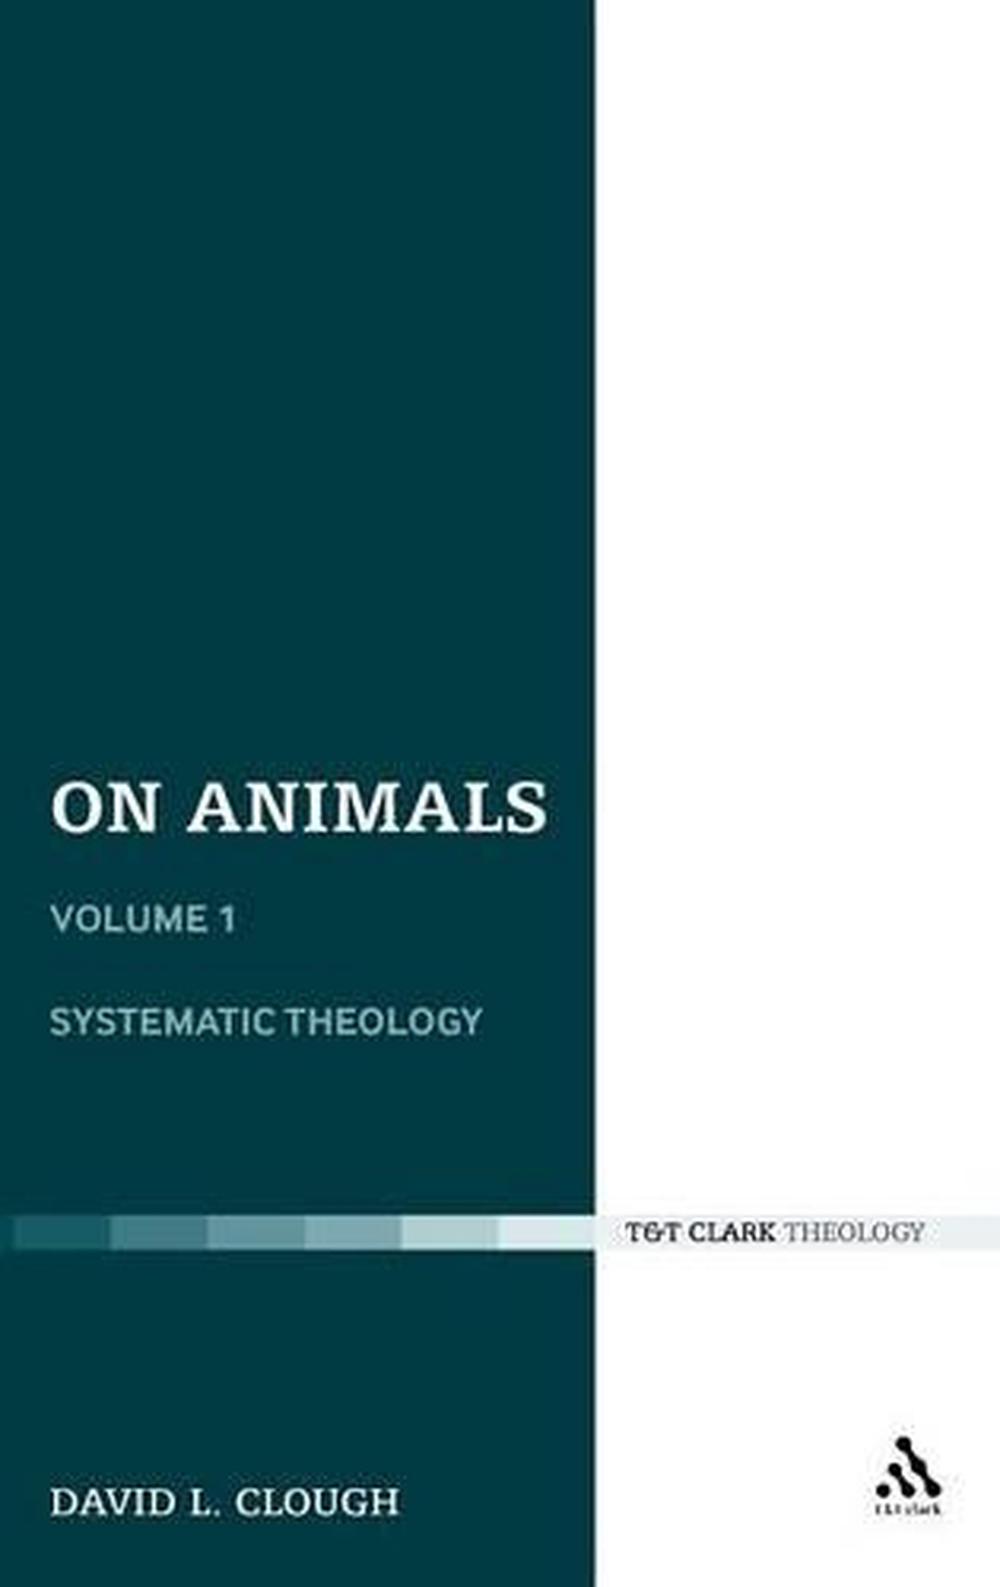 On Animals Volume I Systematic Theology by David L. Clough (English) Hardcover 9780567139481